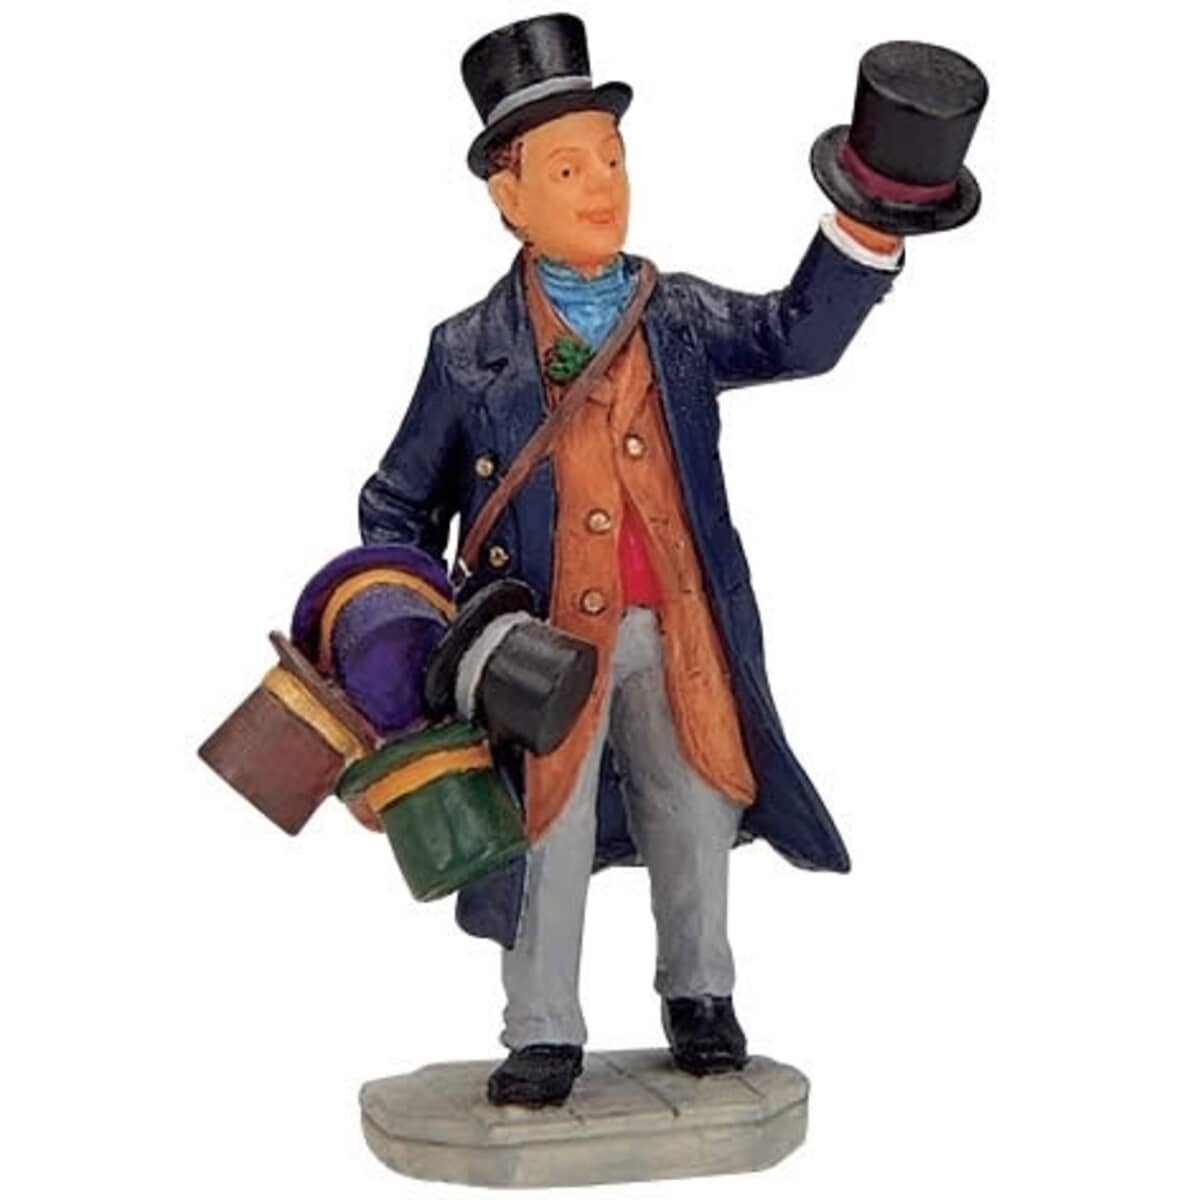 Lemax Christmas Village Top Hat Peddler - 12477 - (12477) - £2.49 from ...